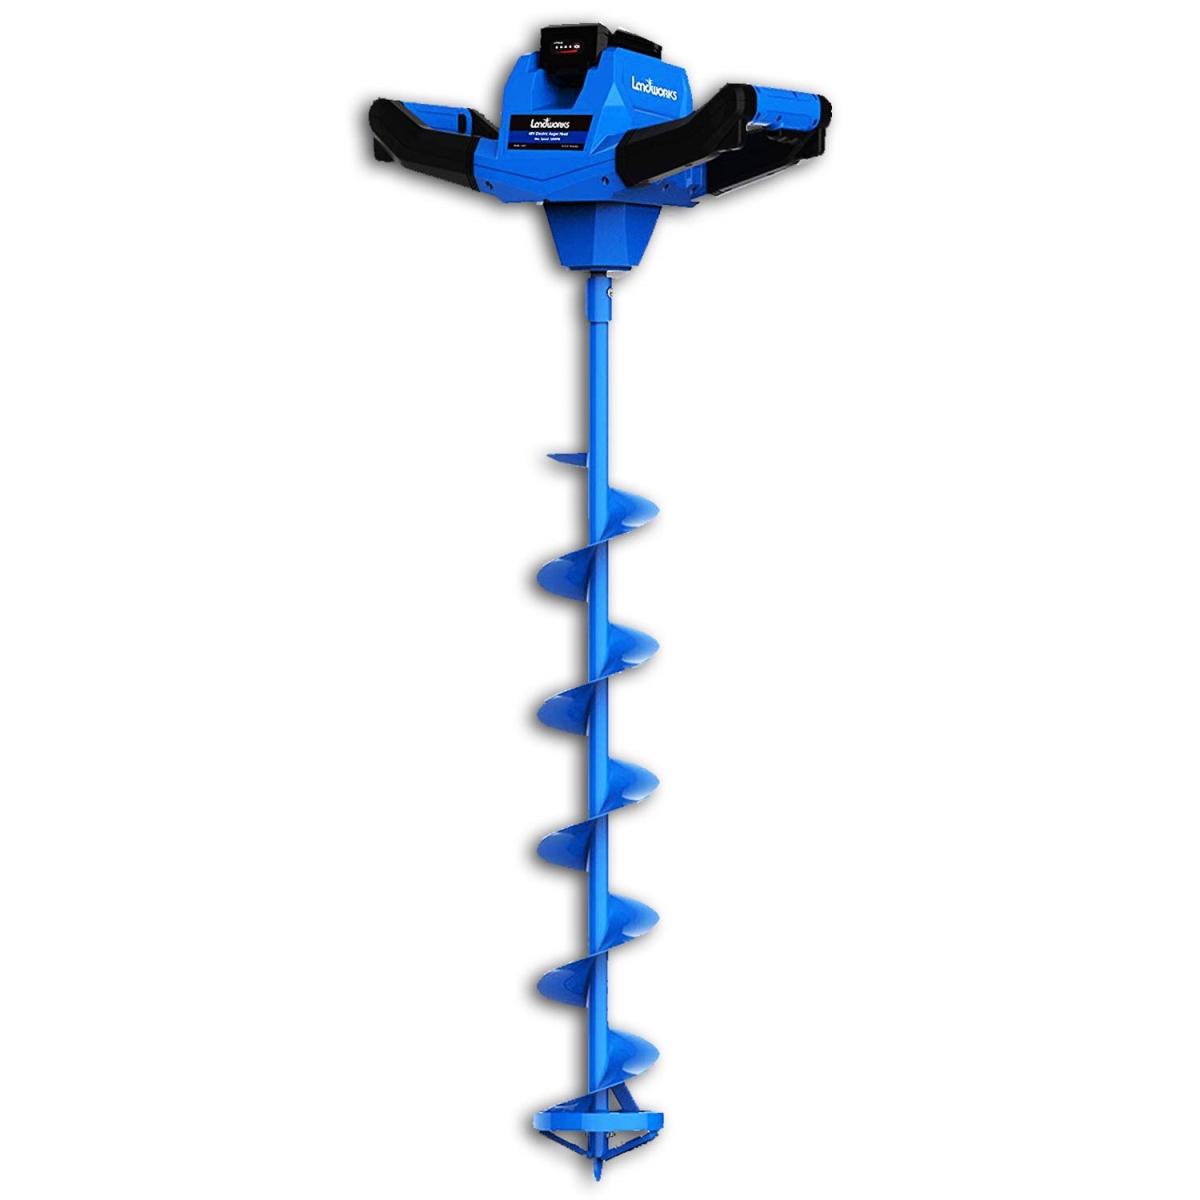 Otf-guo003 8 X 39 In. Heavy Duty Eco-friendly Electric Earth Ice Auger Power Head With Cordless Steel, Lithium Ion Battery & Charger Holes In Ice